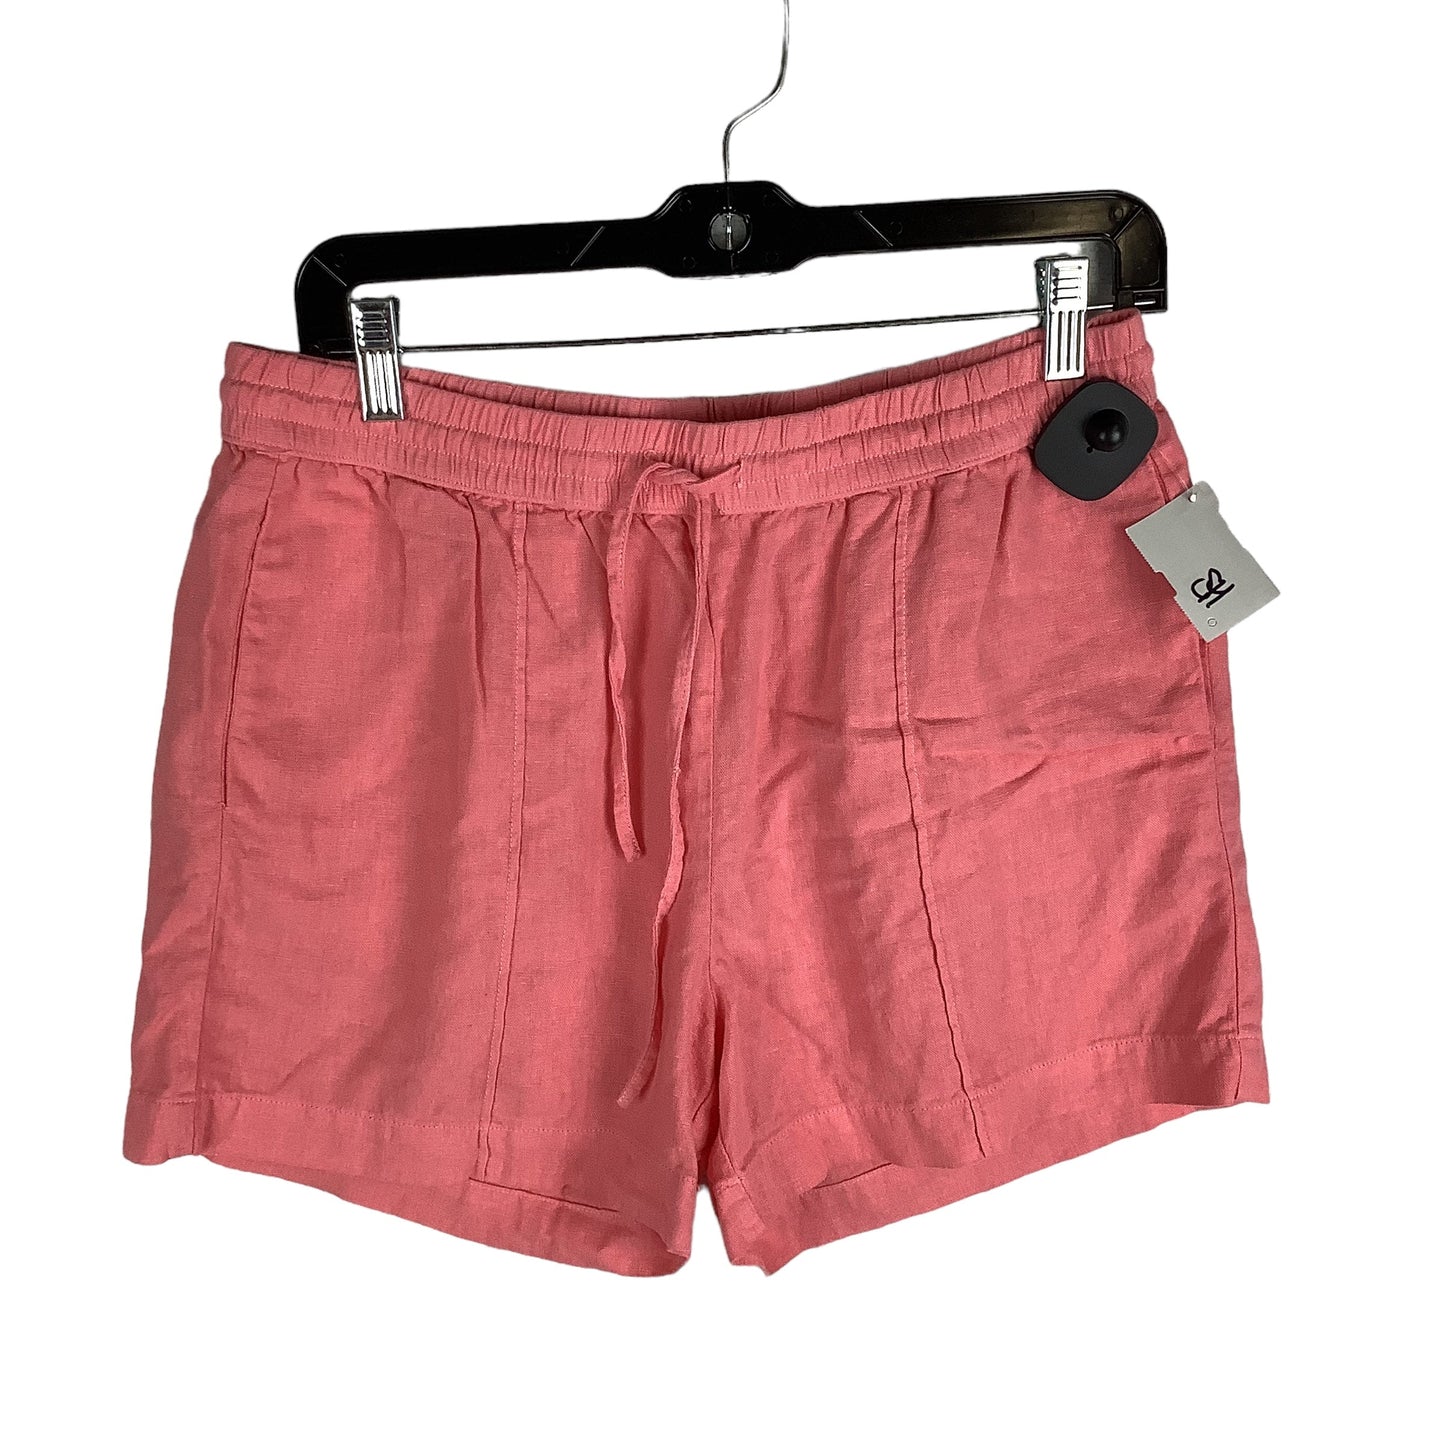 Pink Shorts Clothes Mentor, Size S